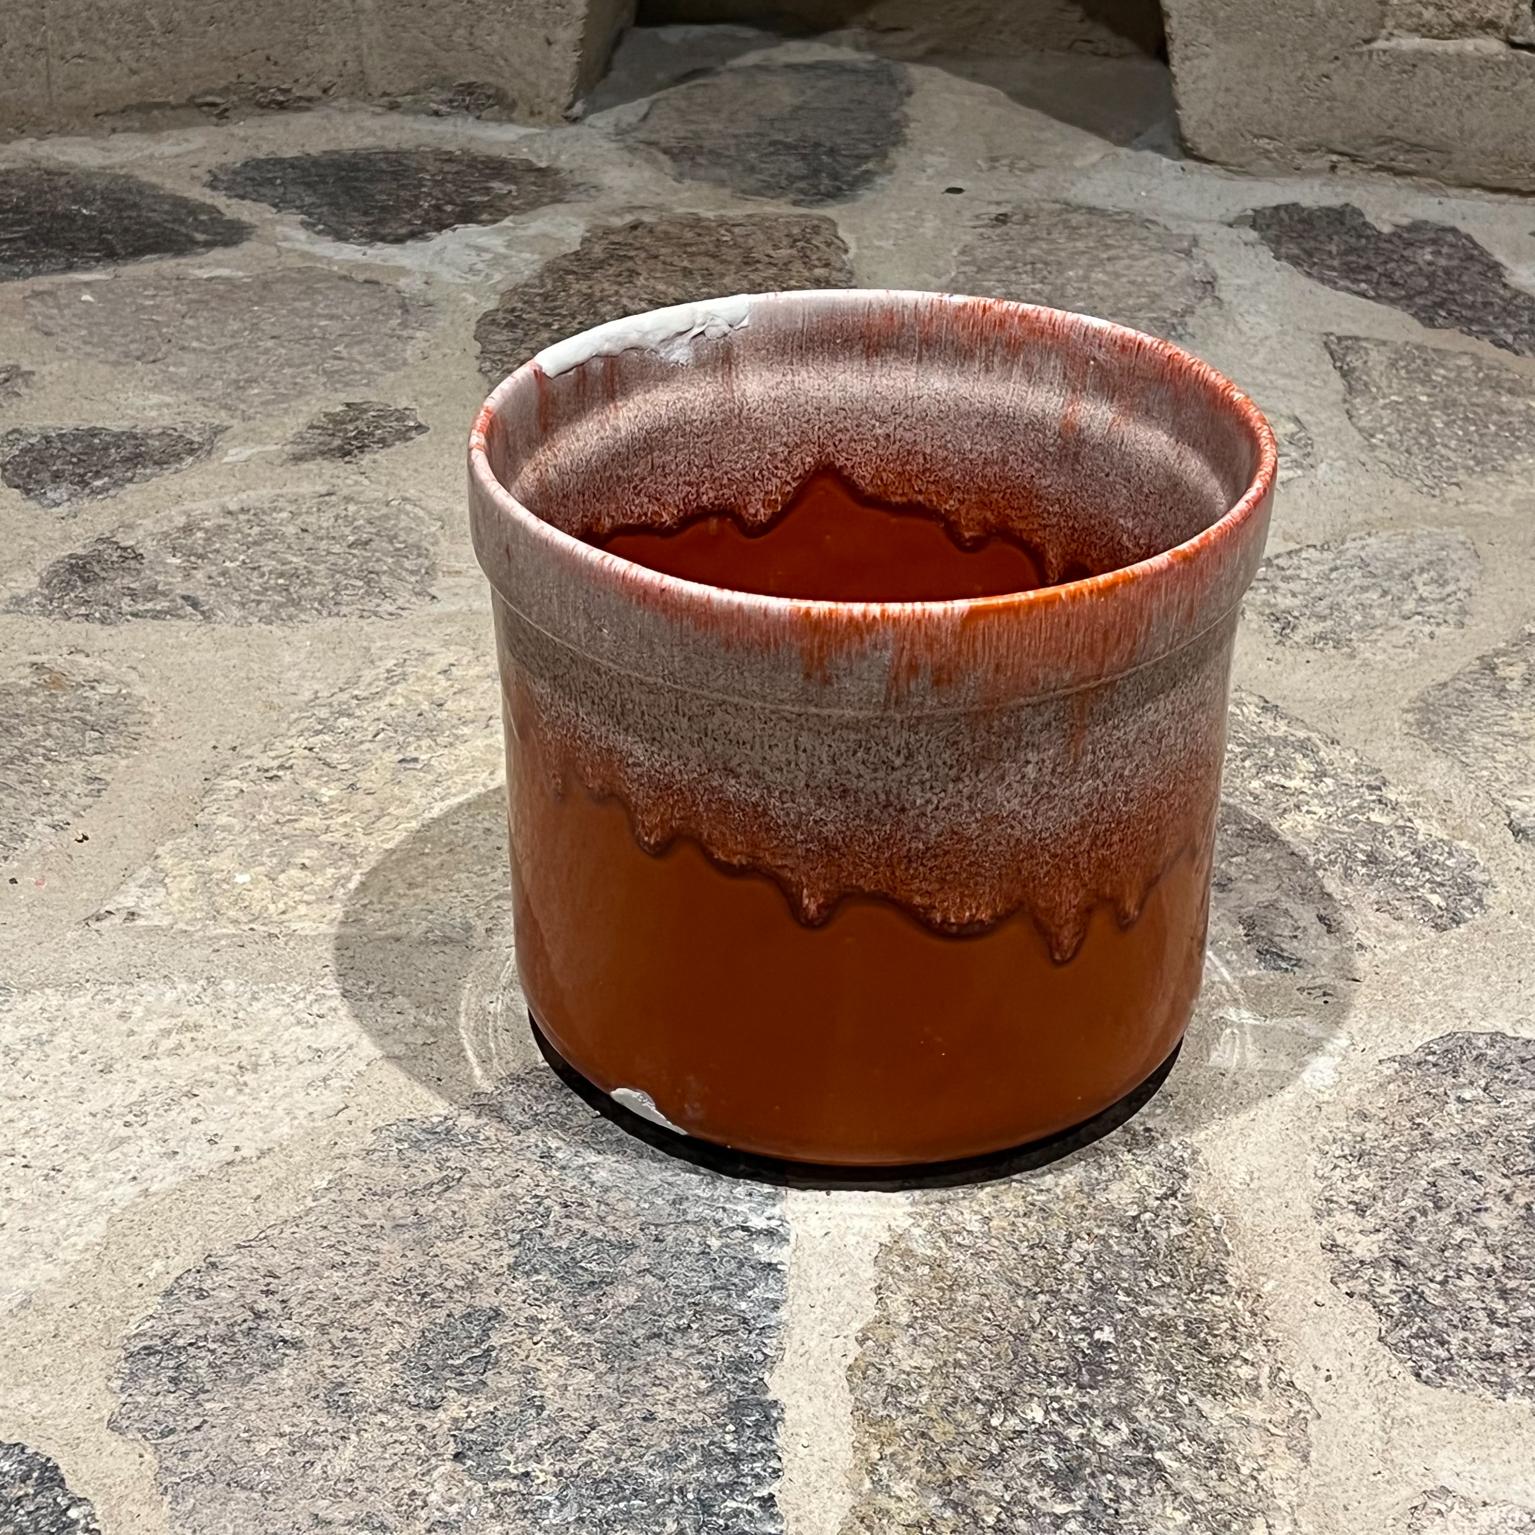 1960s Orange Drip Glaze planter Pot David Cressey Style Architectural Pottery California
8 tall x 9.75 diameter
Planter garden patio home
In the Style of David Cressey
Original preowned unrestored vintage condition. Wear is visible. Chipping